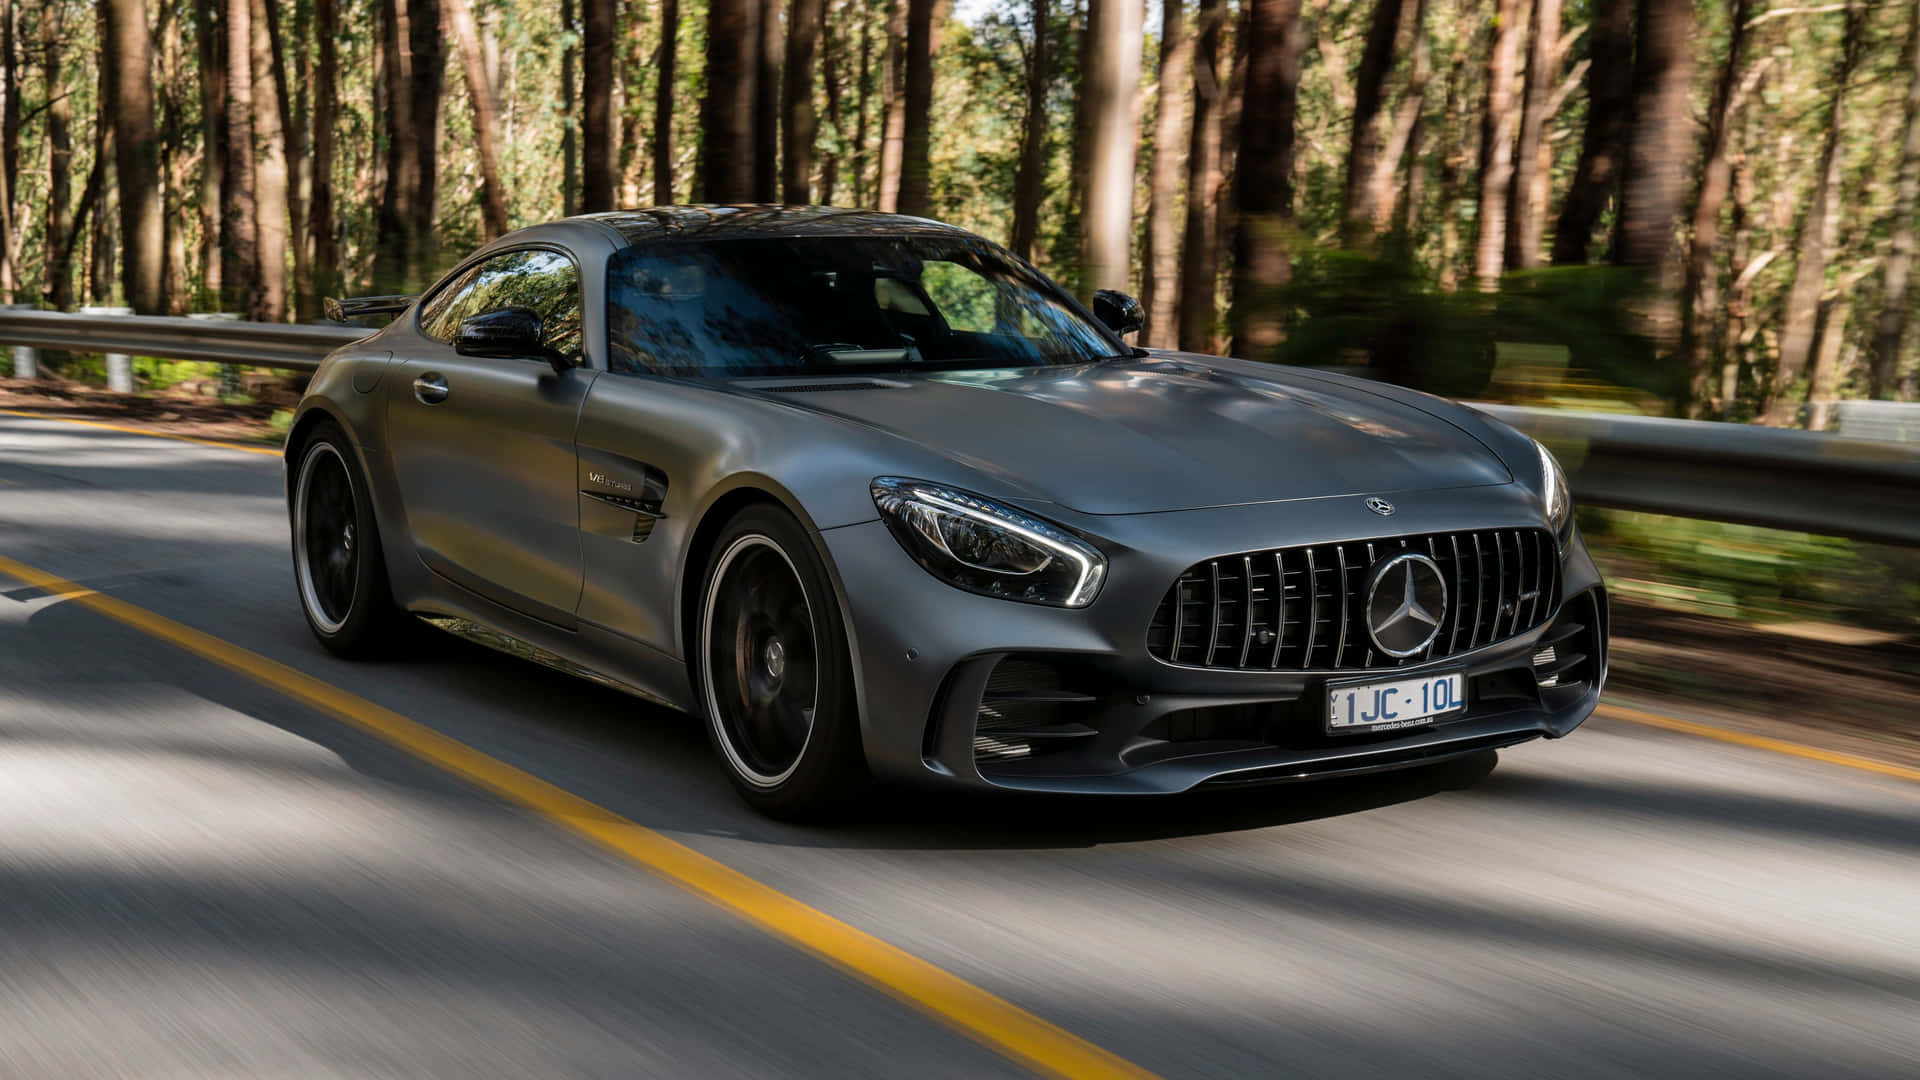 The Power and Prestige of the Mercedes Amg GT Wallpaper